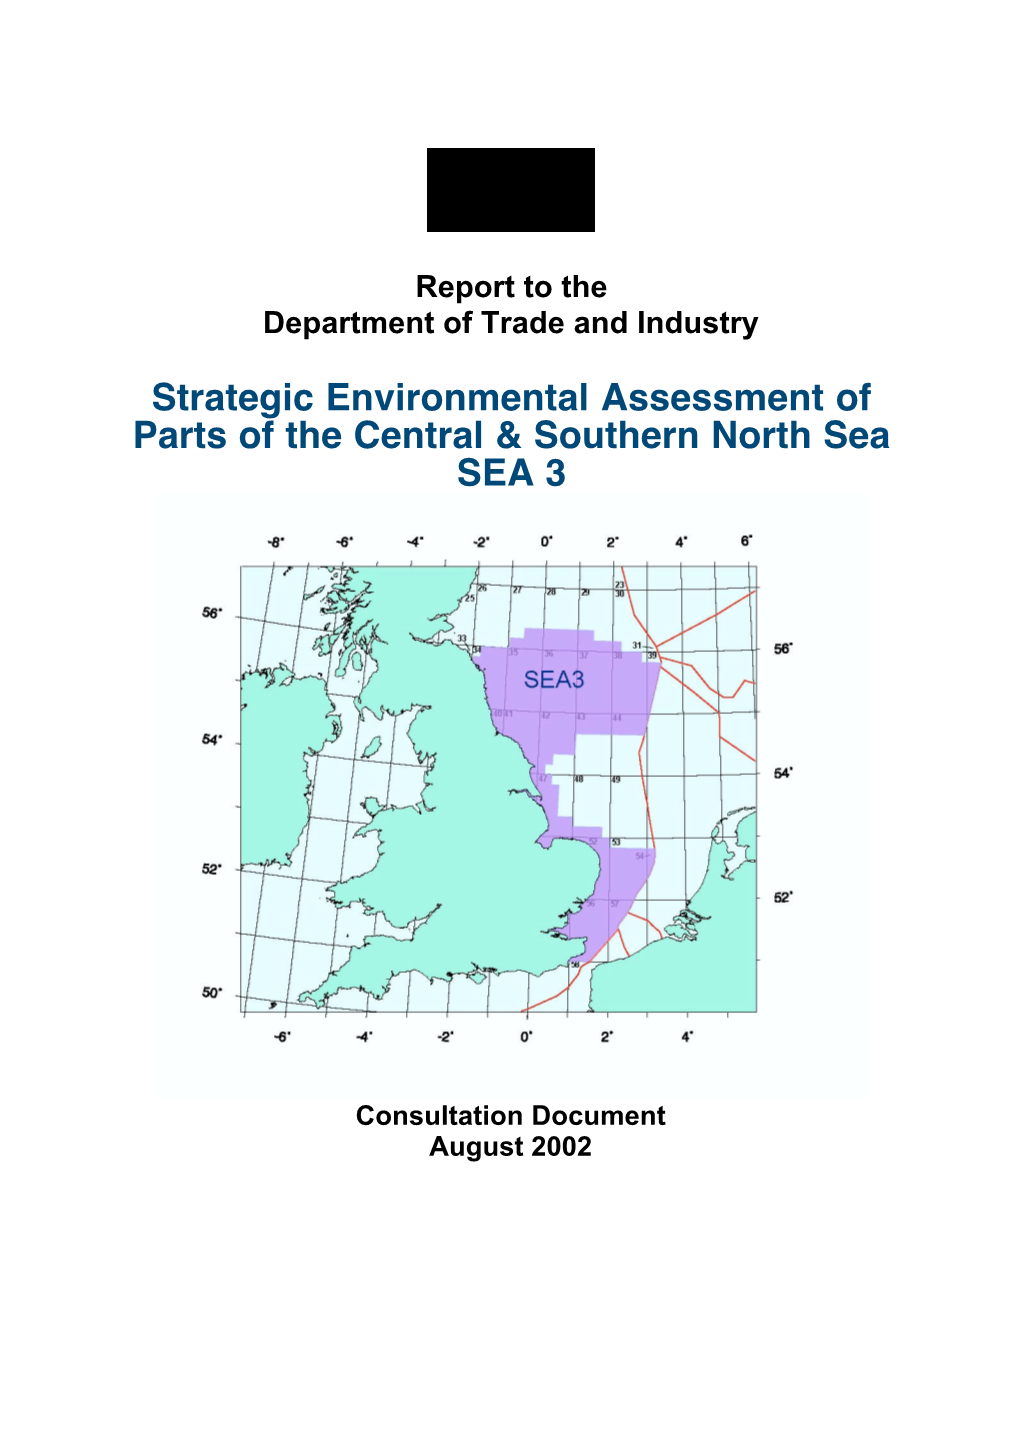 Strategic Environmental Assessment of Parts of the Central & Southern